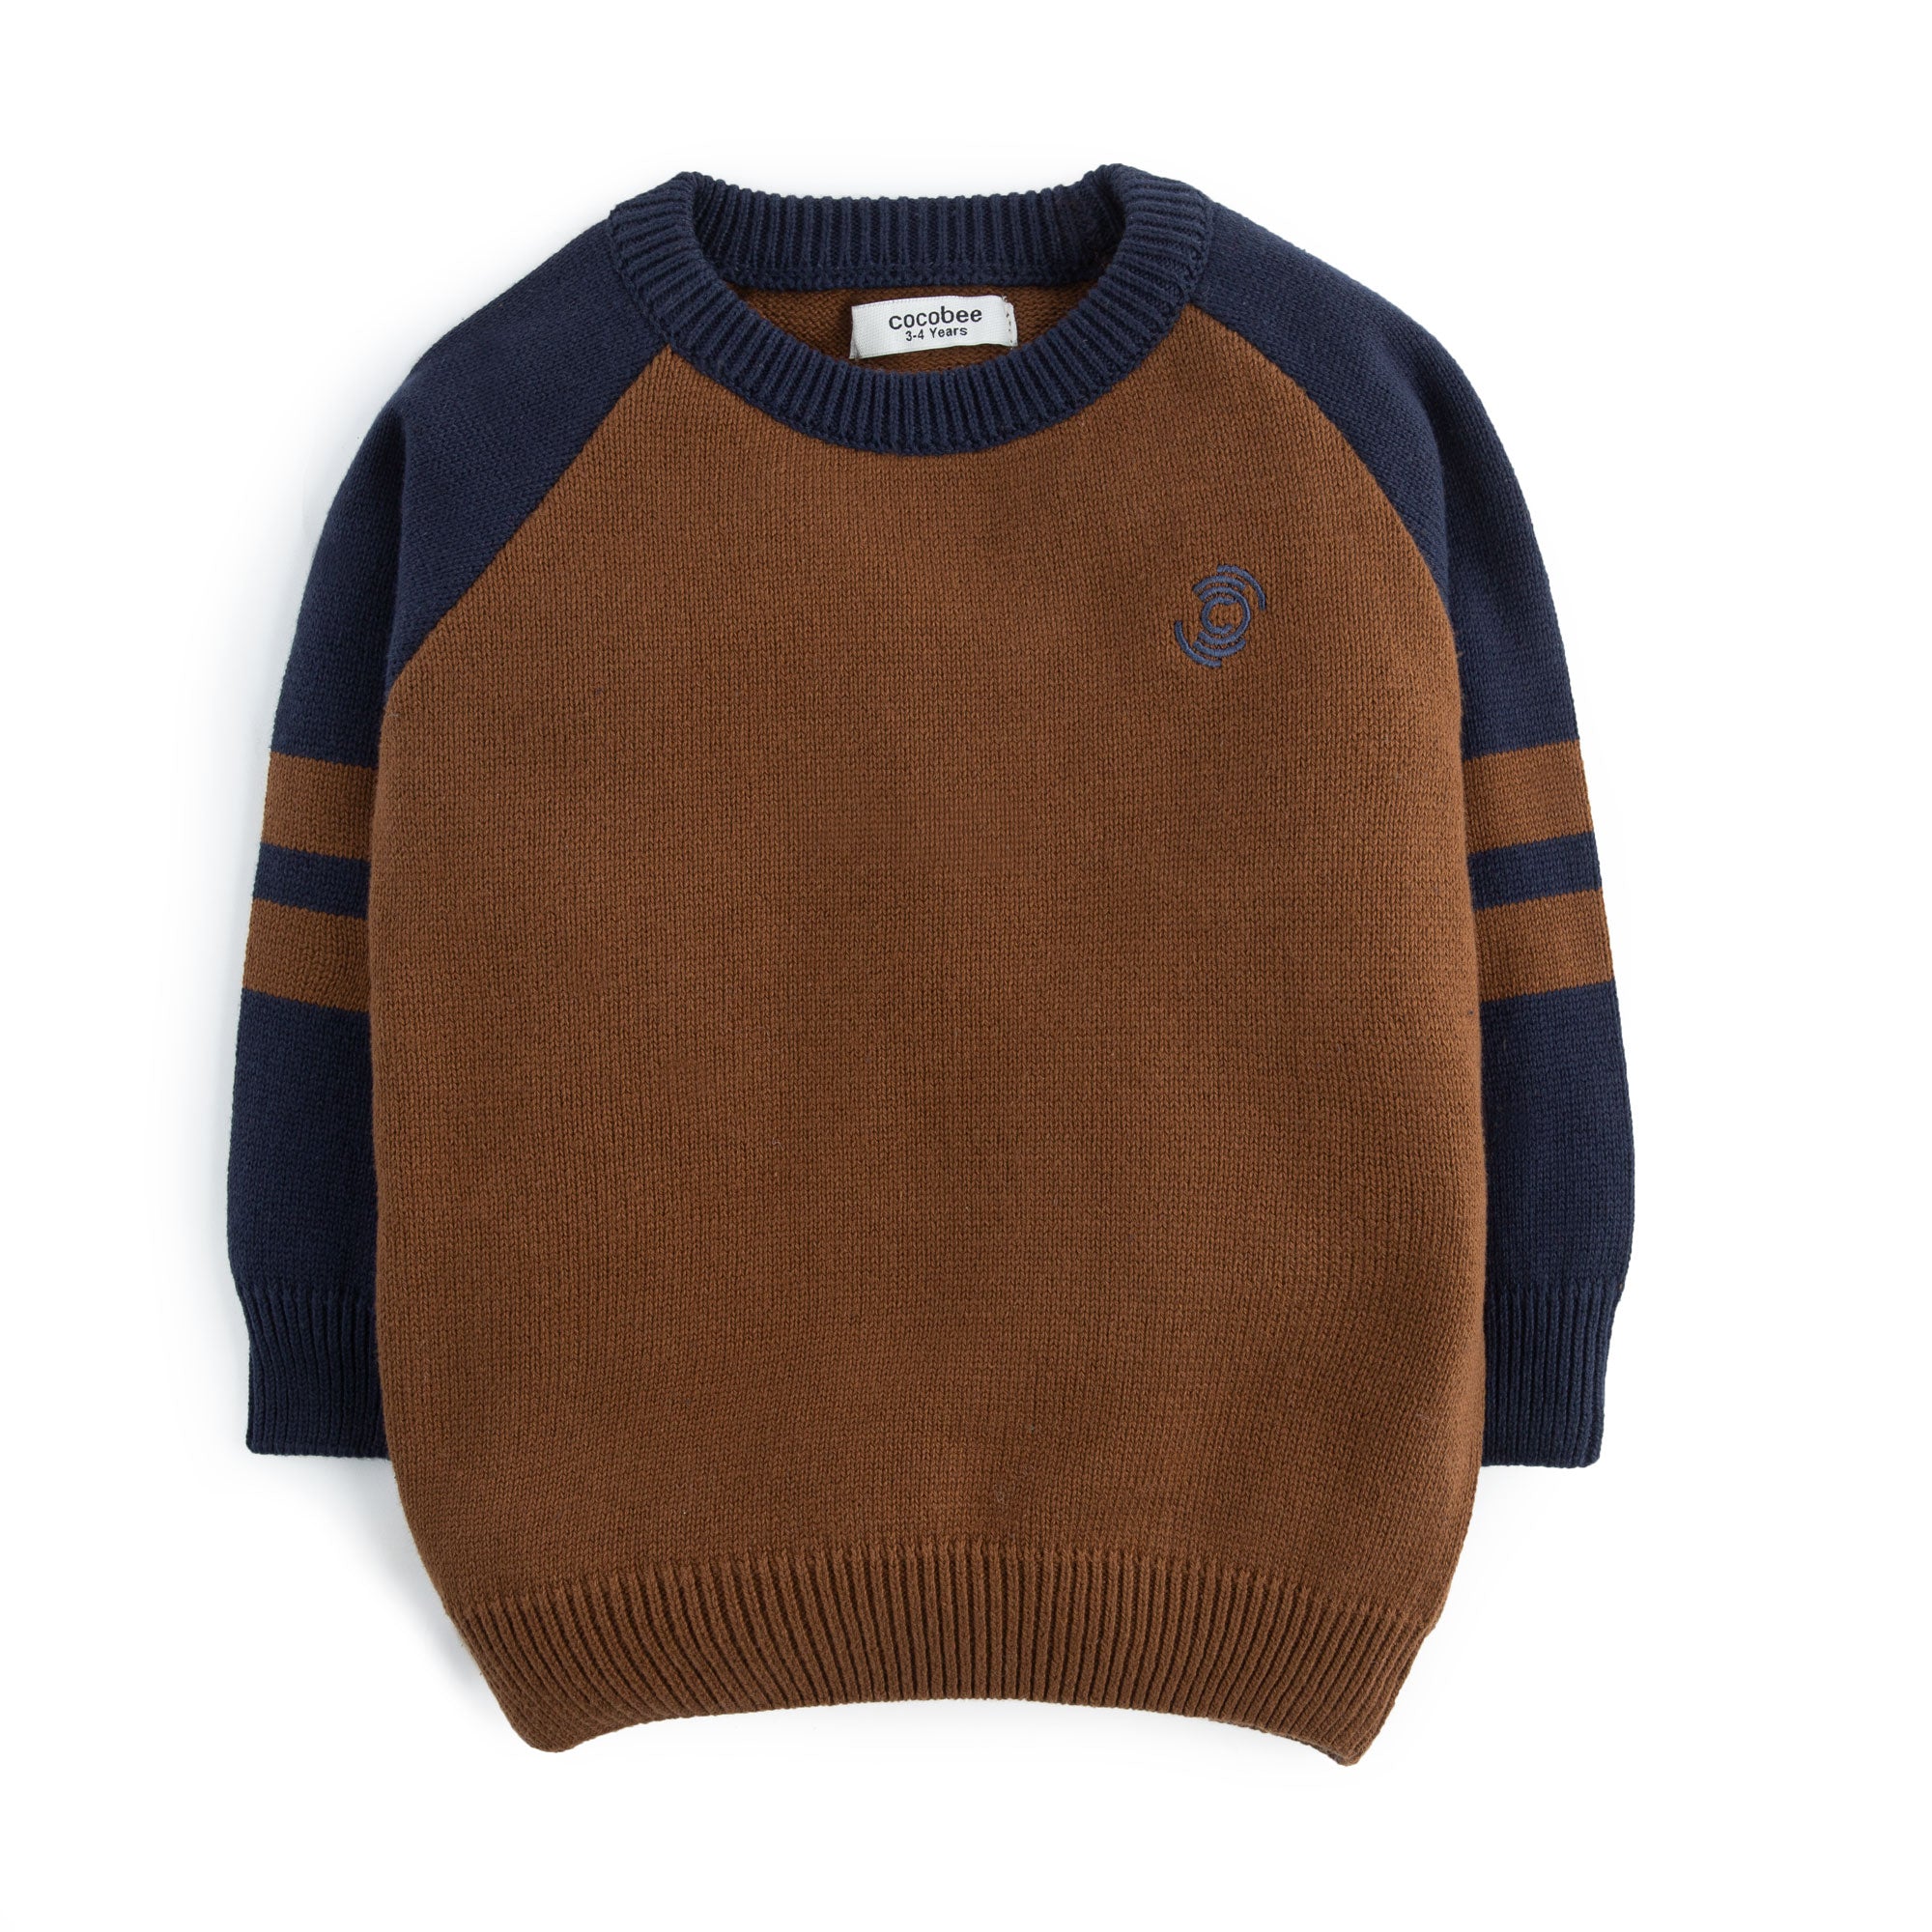 Umber Knit Sweater